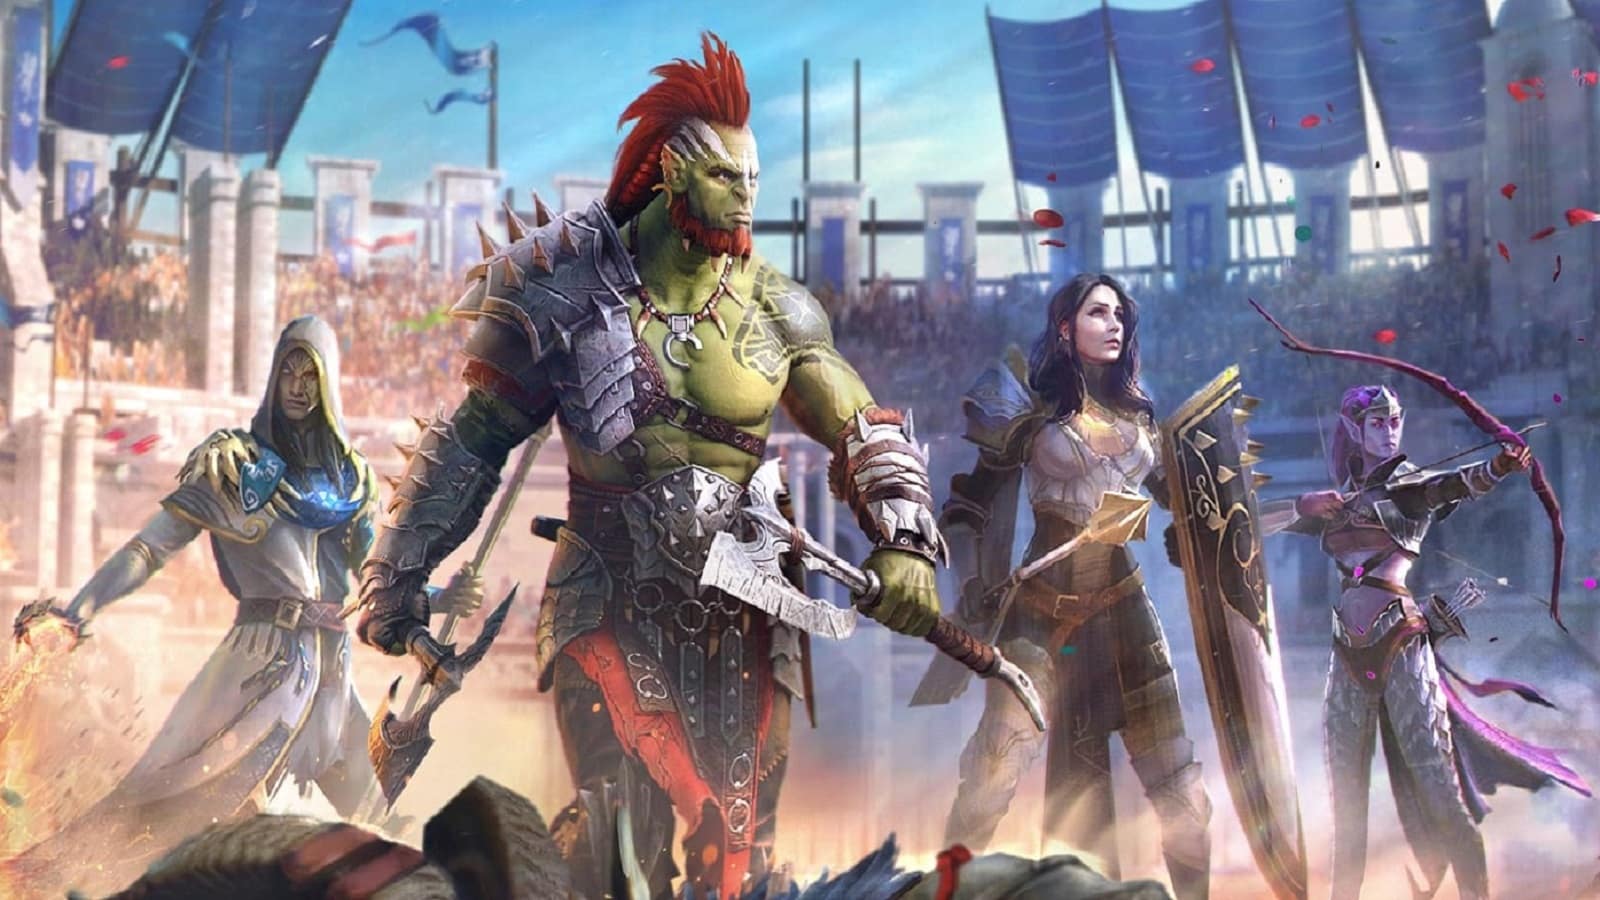 Play Free Online Games of the Highest Quality - Plarium